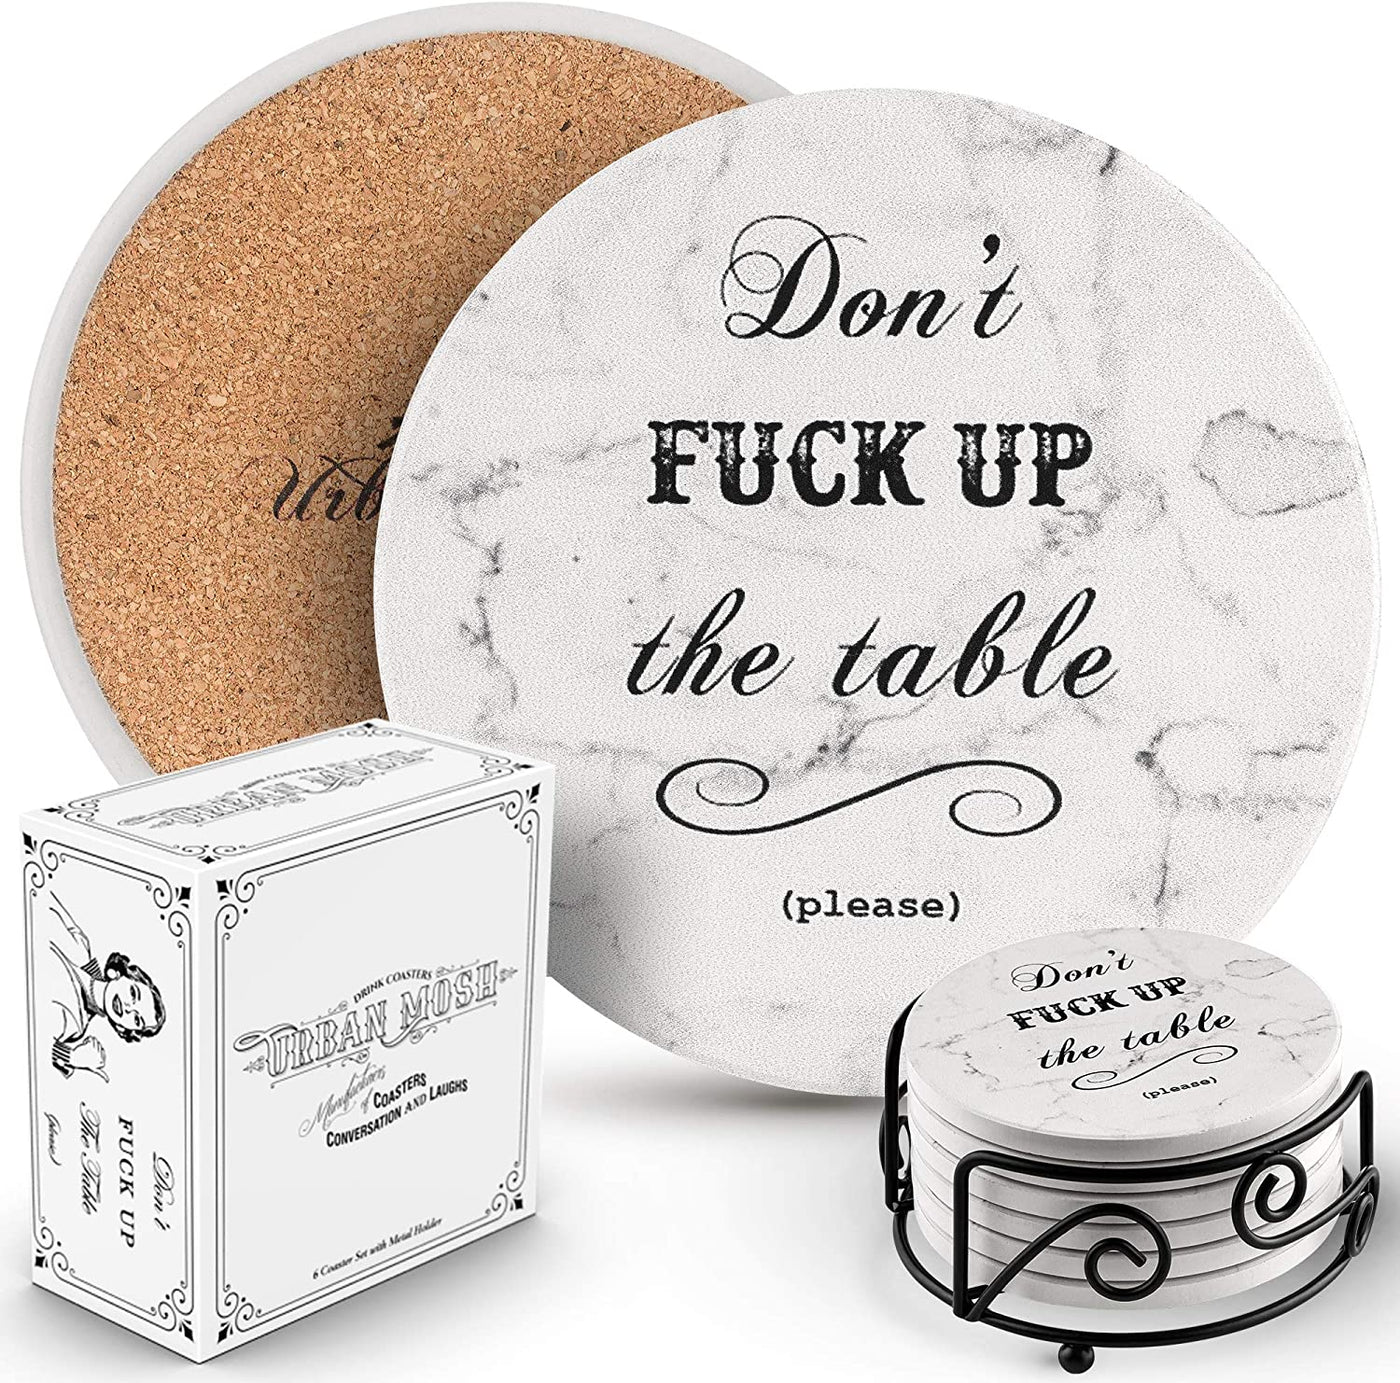 Funny Drink Coasters Home Decor Gifts Housewarming